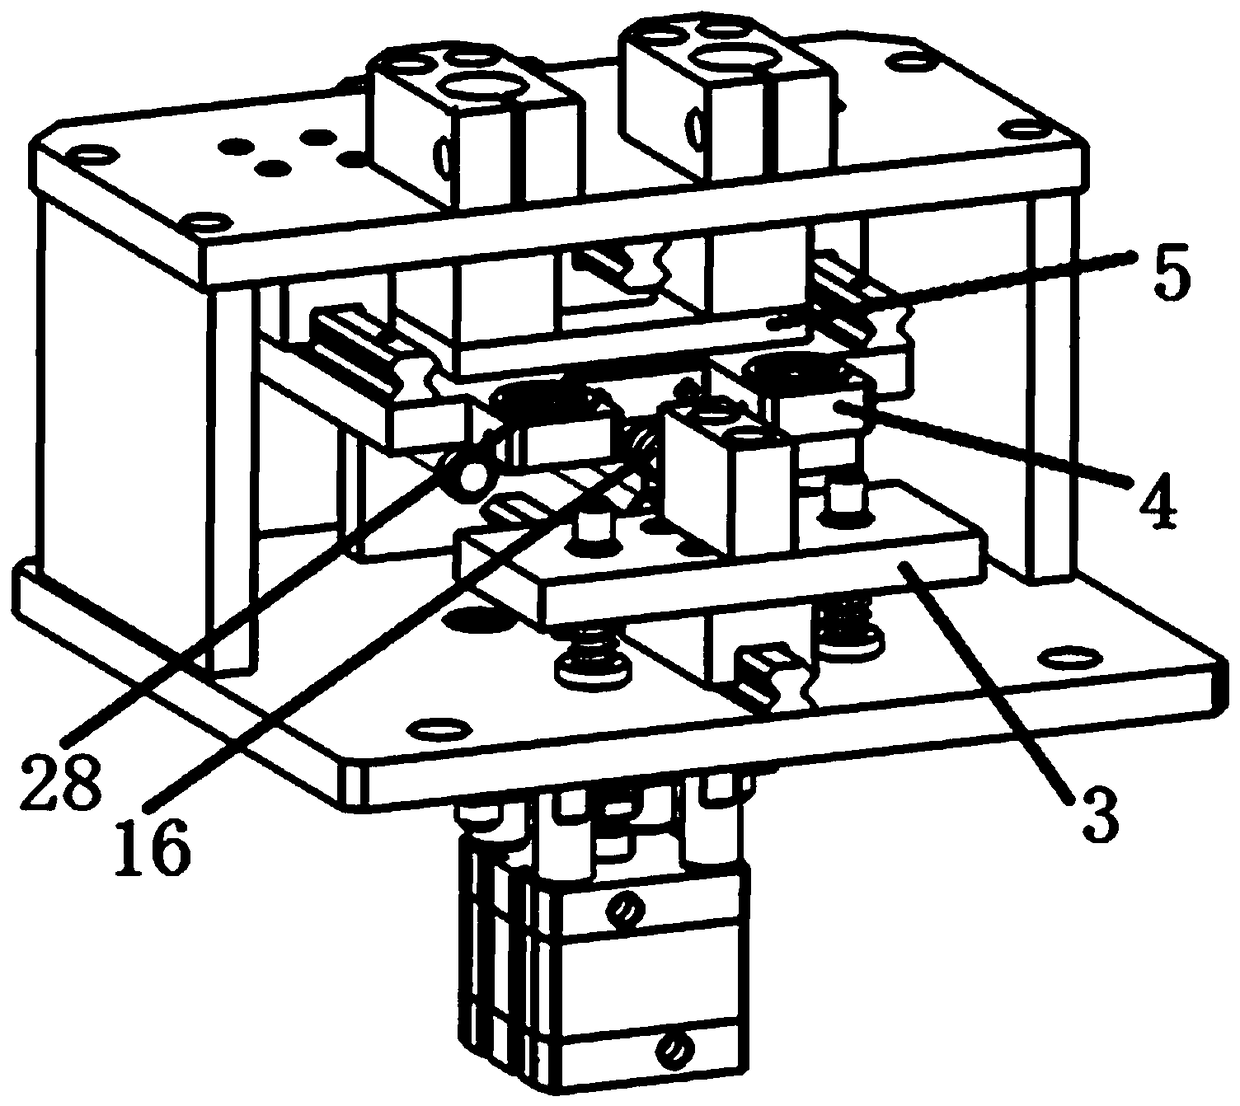 Axle sleeve automatic assembly detection device